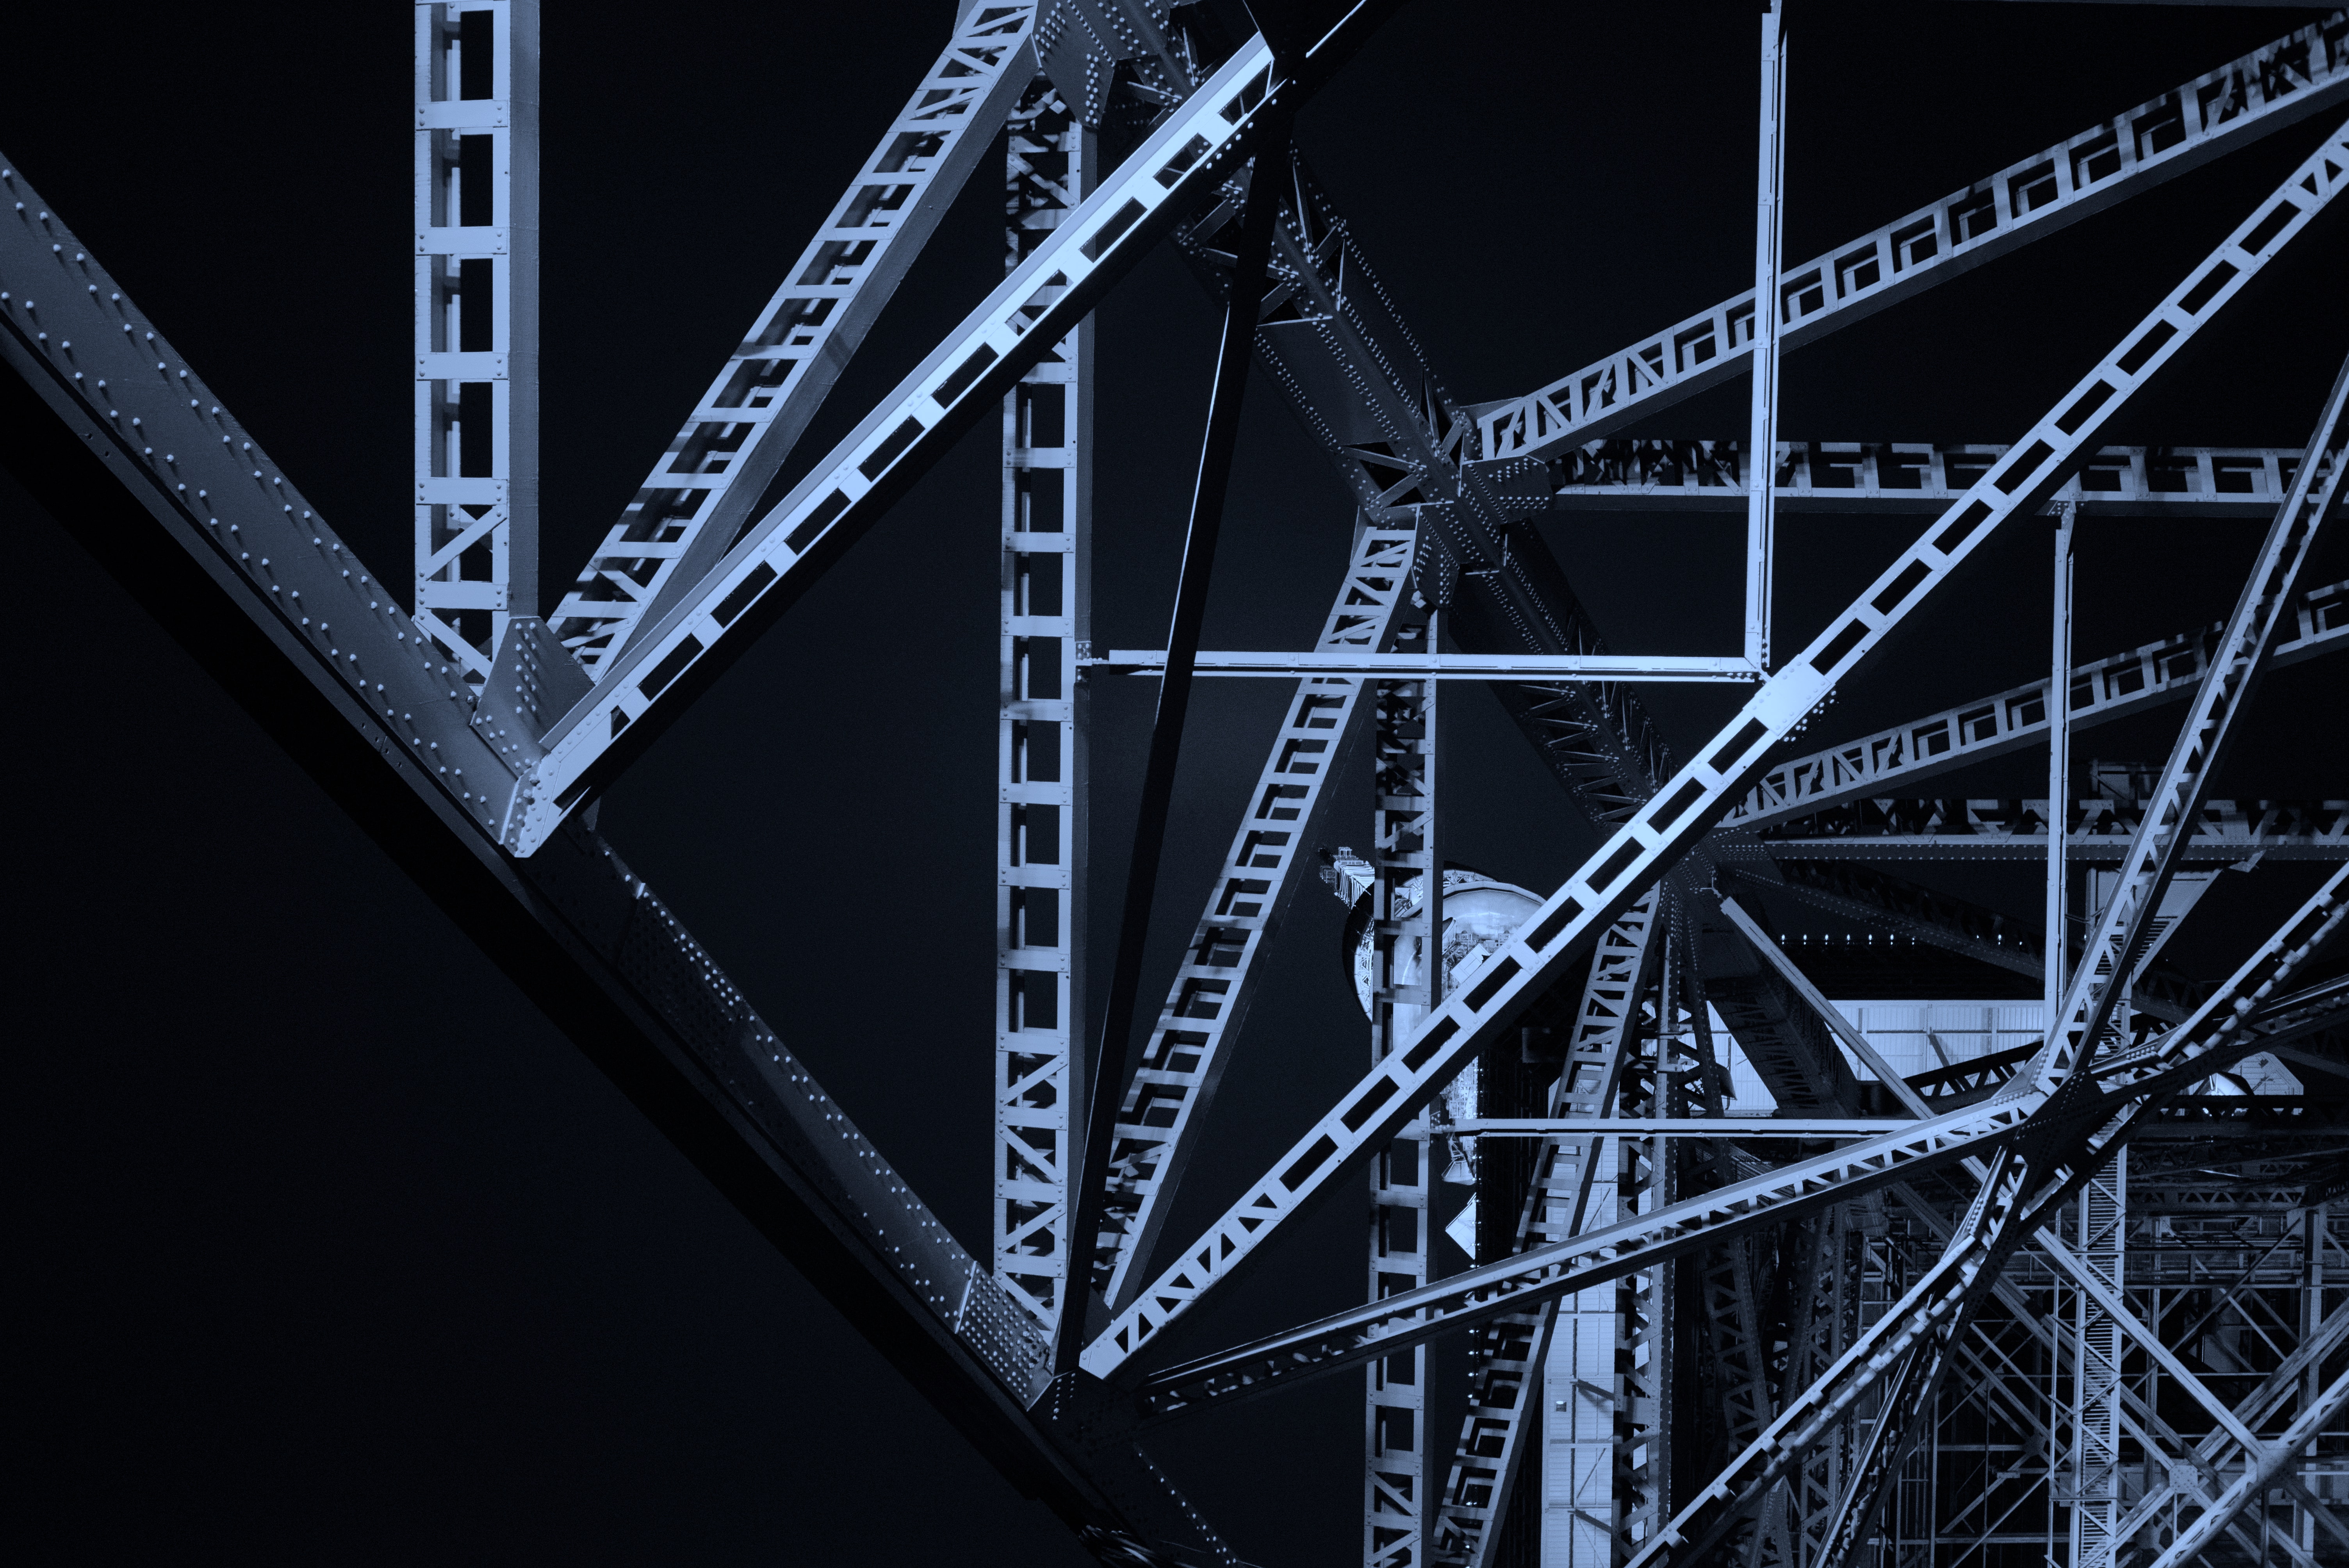 Steel beams jut at various angles across the frame and are cast in a blue light